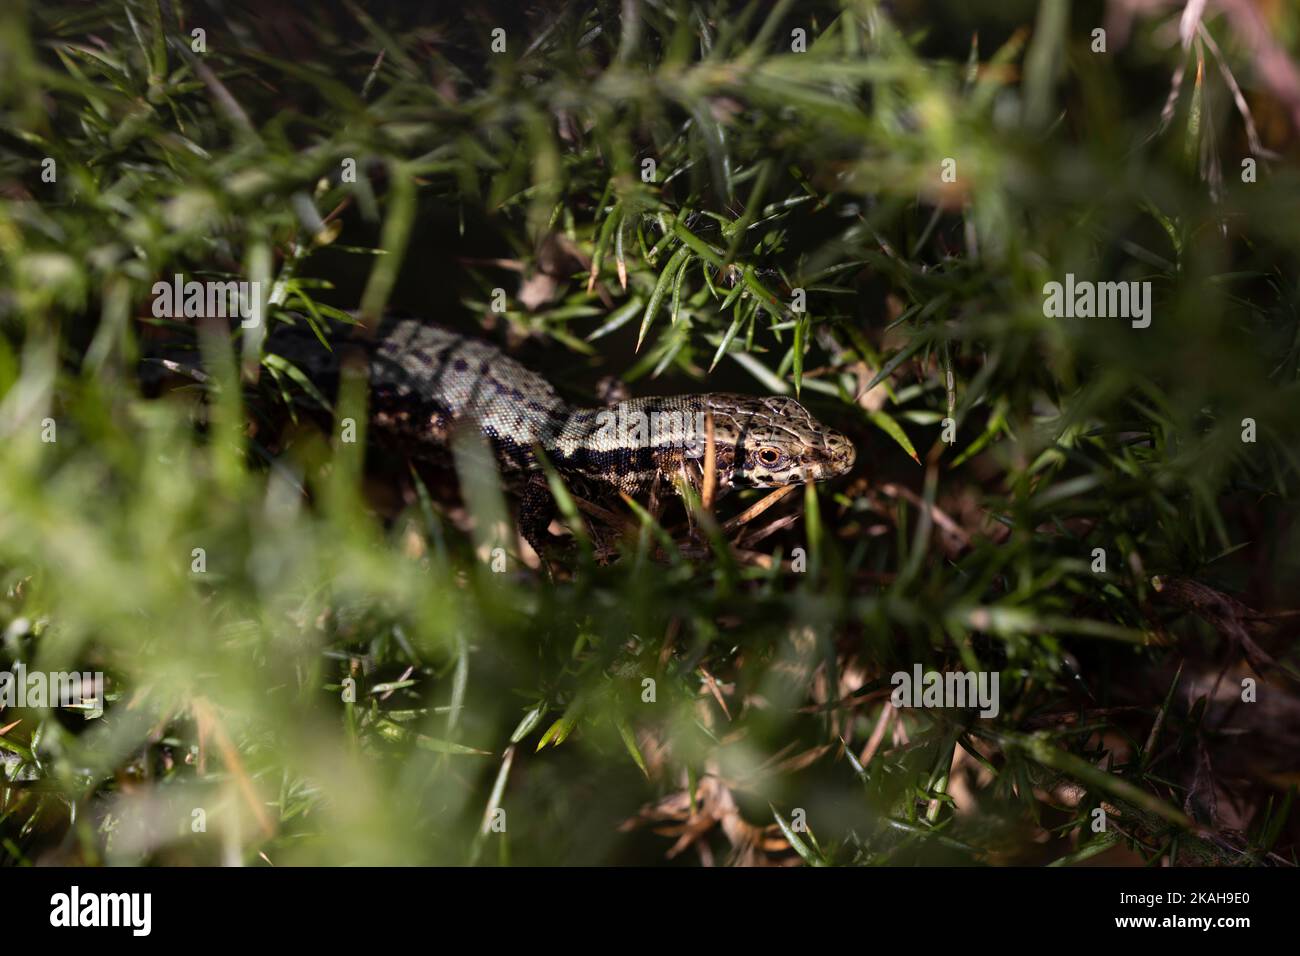 camouflaged lizard on a green plant staring at the camera. macro photography. wildlife. Copy space. Stock Photo